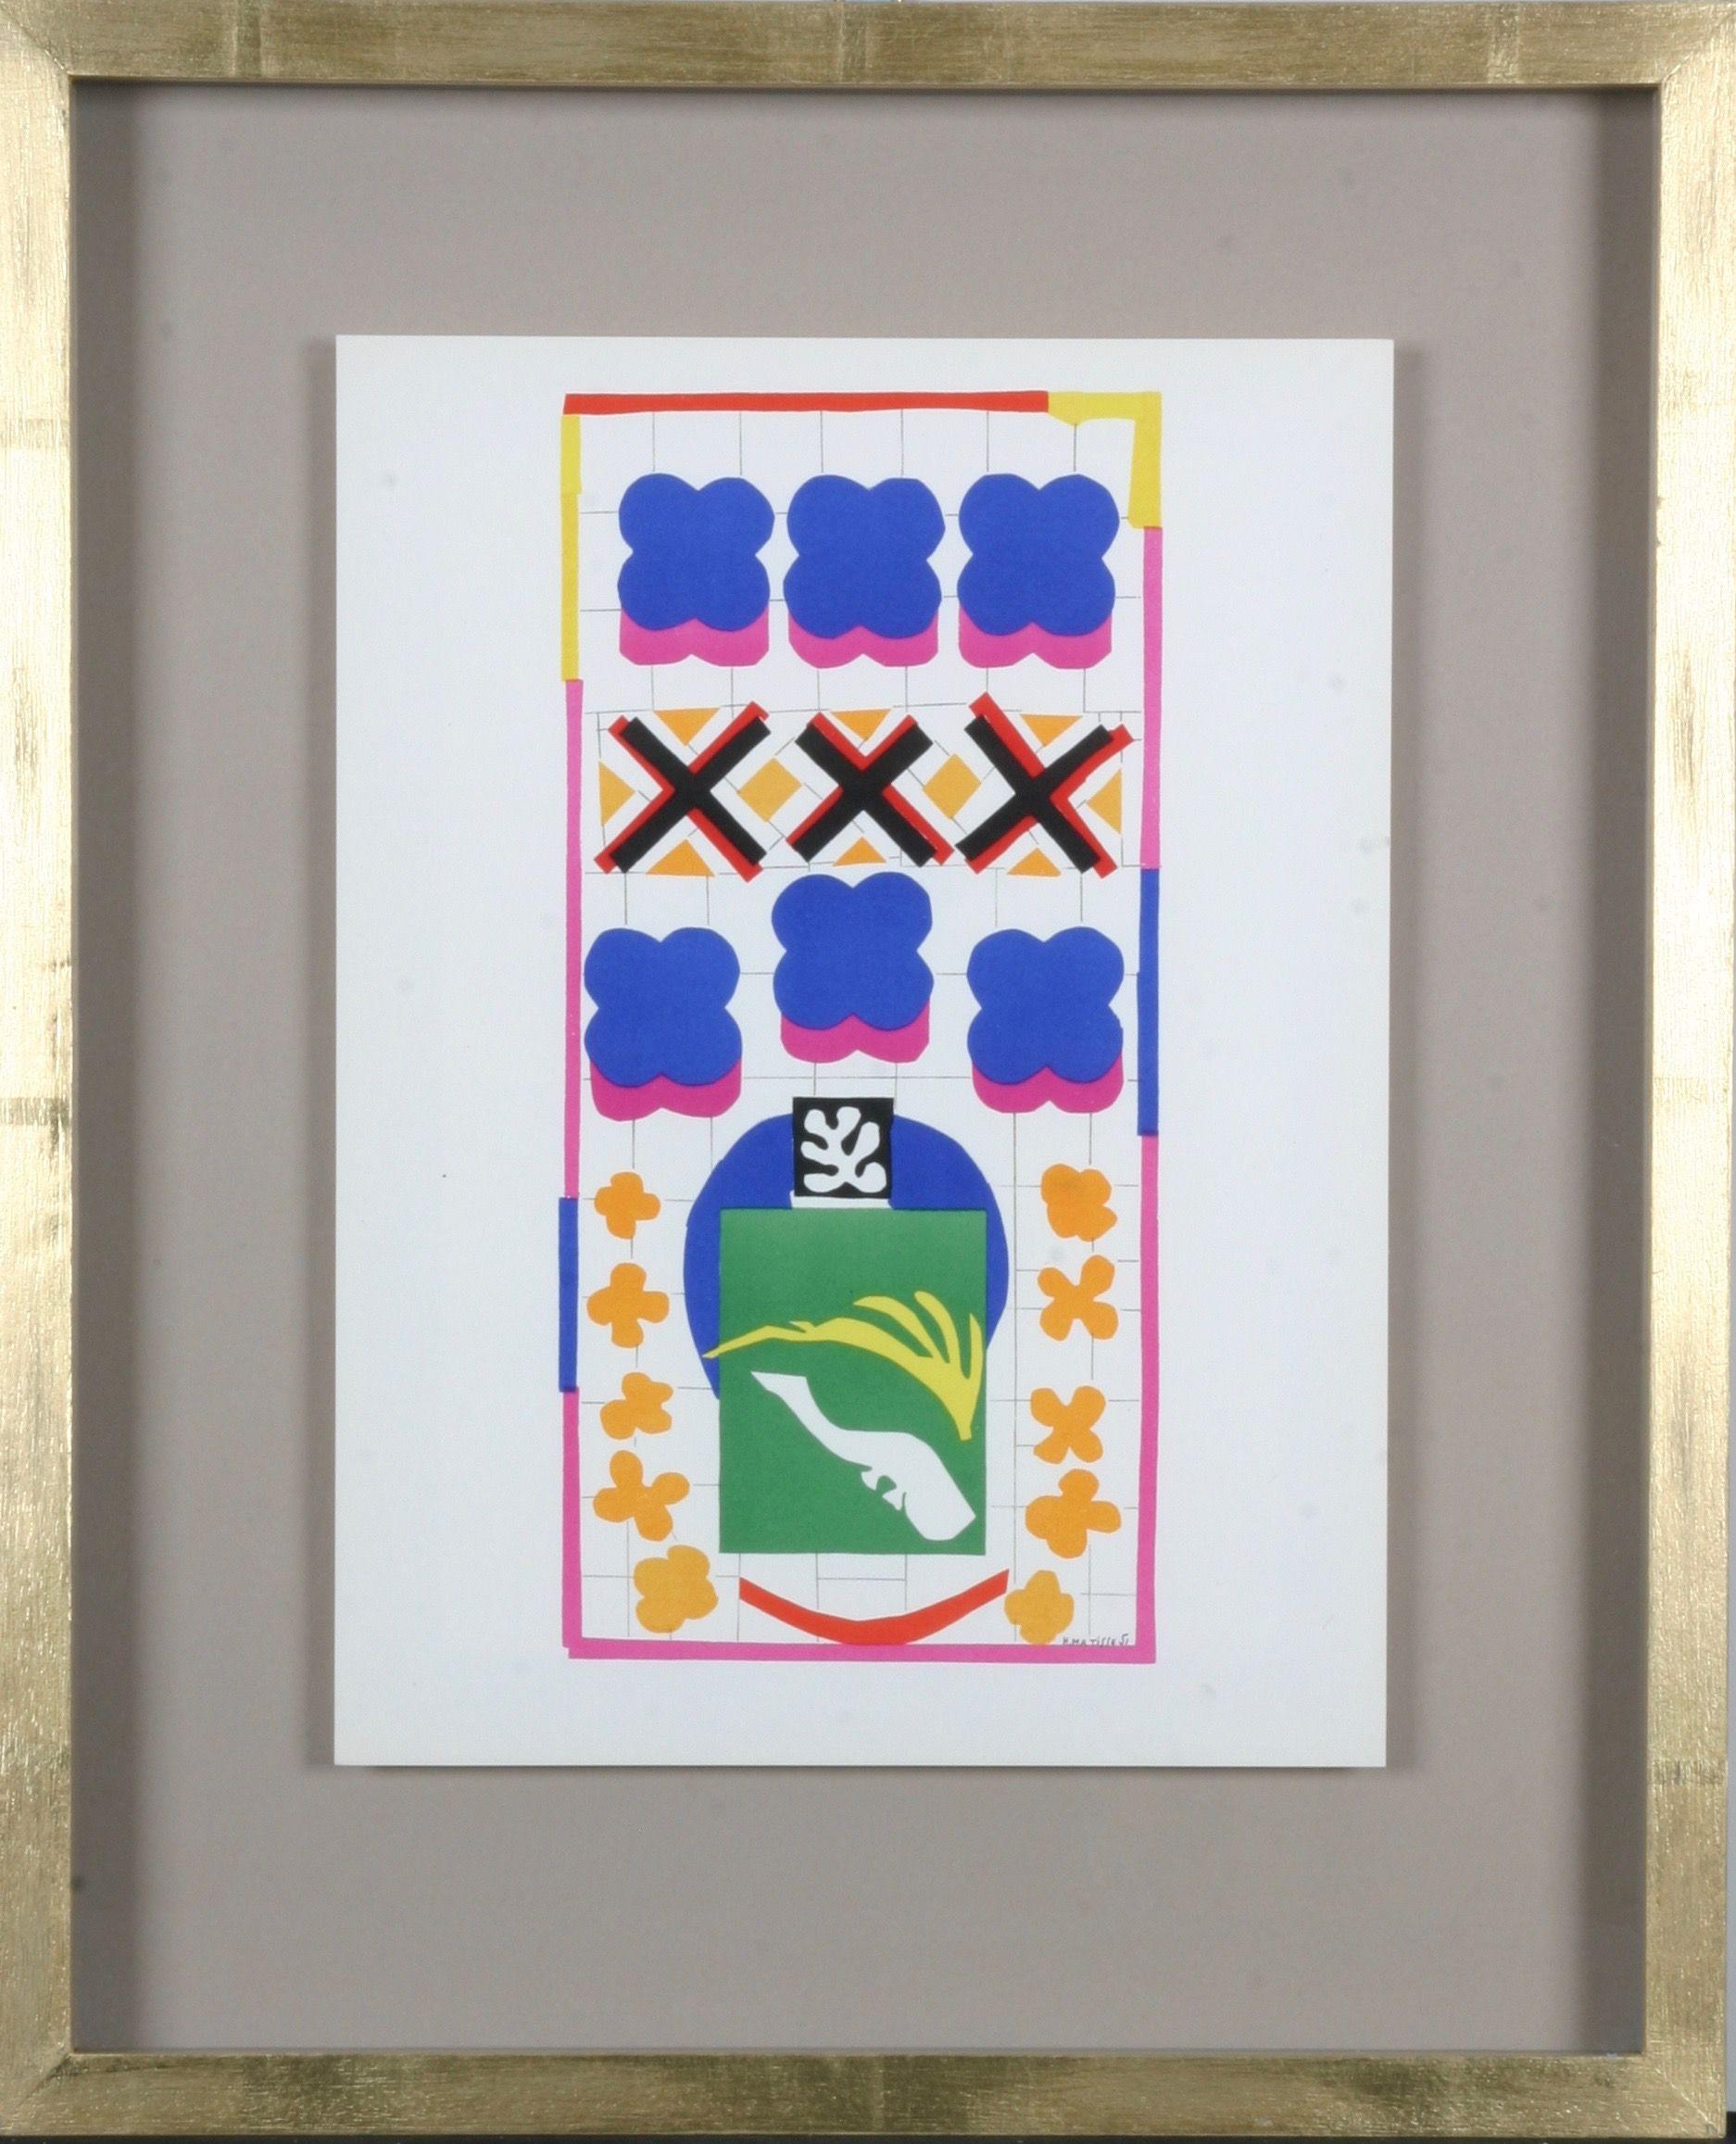 How many cut-outs did Matisse make?